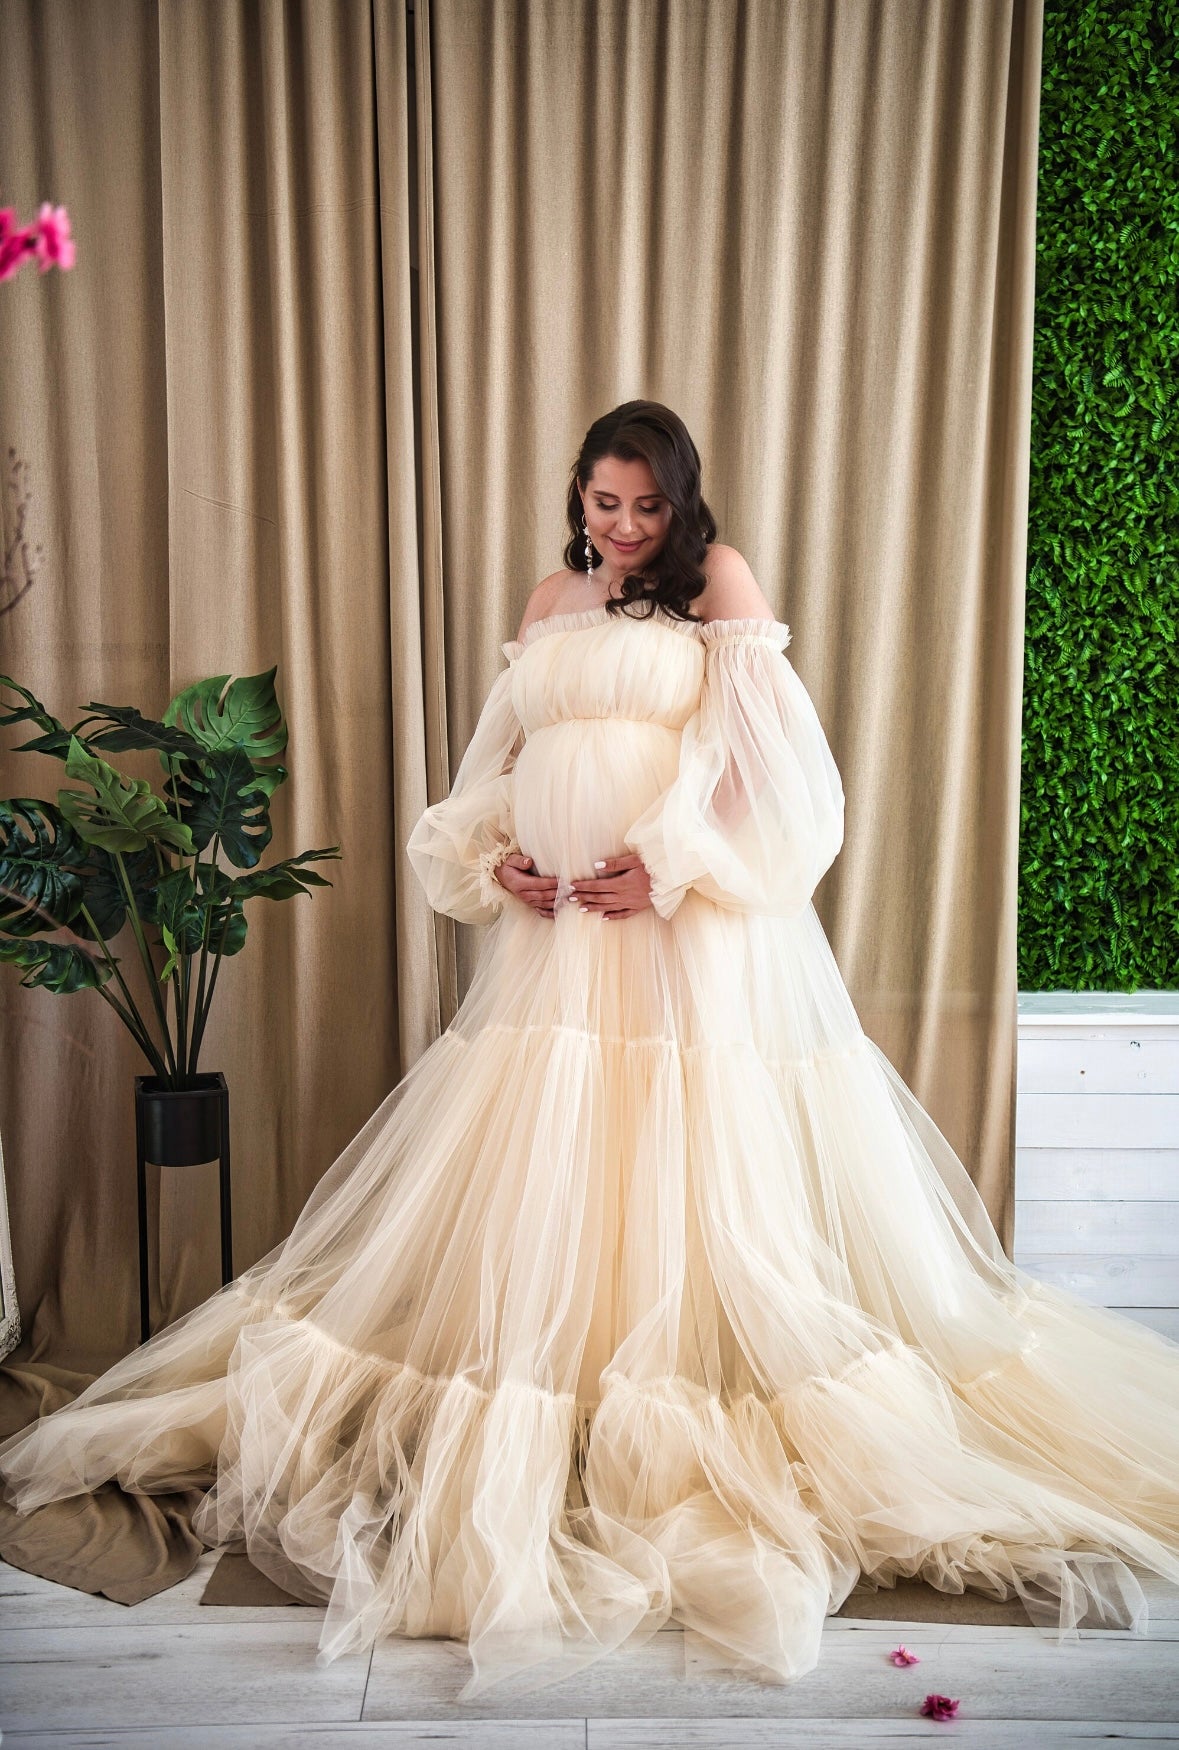 Choosing the Perfect Maternity Dress for Your Photoshoot